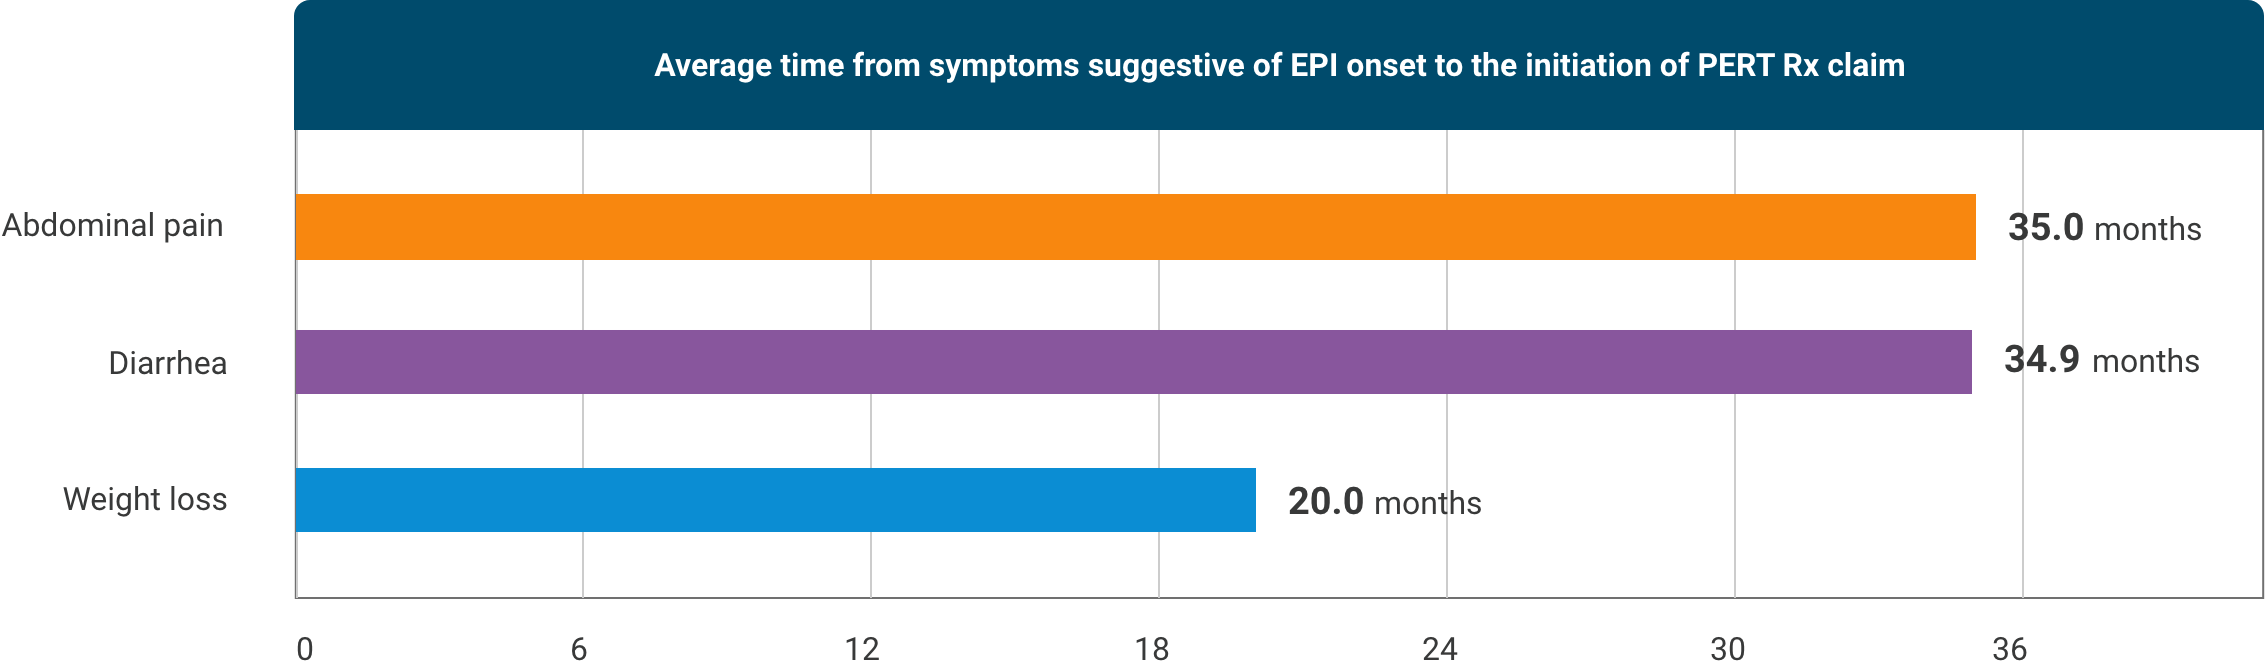 Chart with Average time from symptoms suggestive of EPI onset to the initiation of PERT Rx claim for Abdominal Pain (35 months), Diarrhea (34.9 months), and Weight loss (20 months).